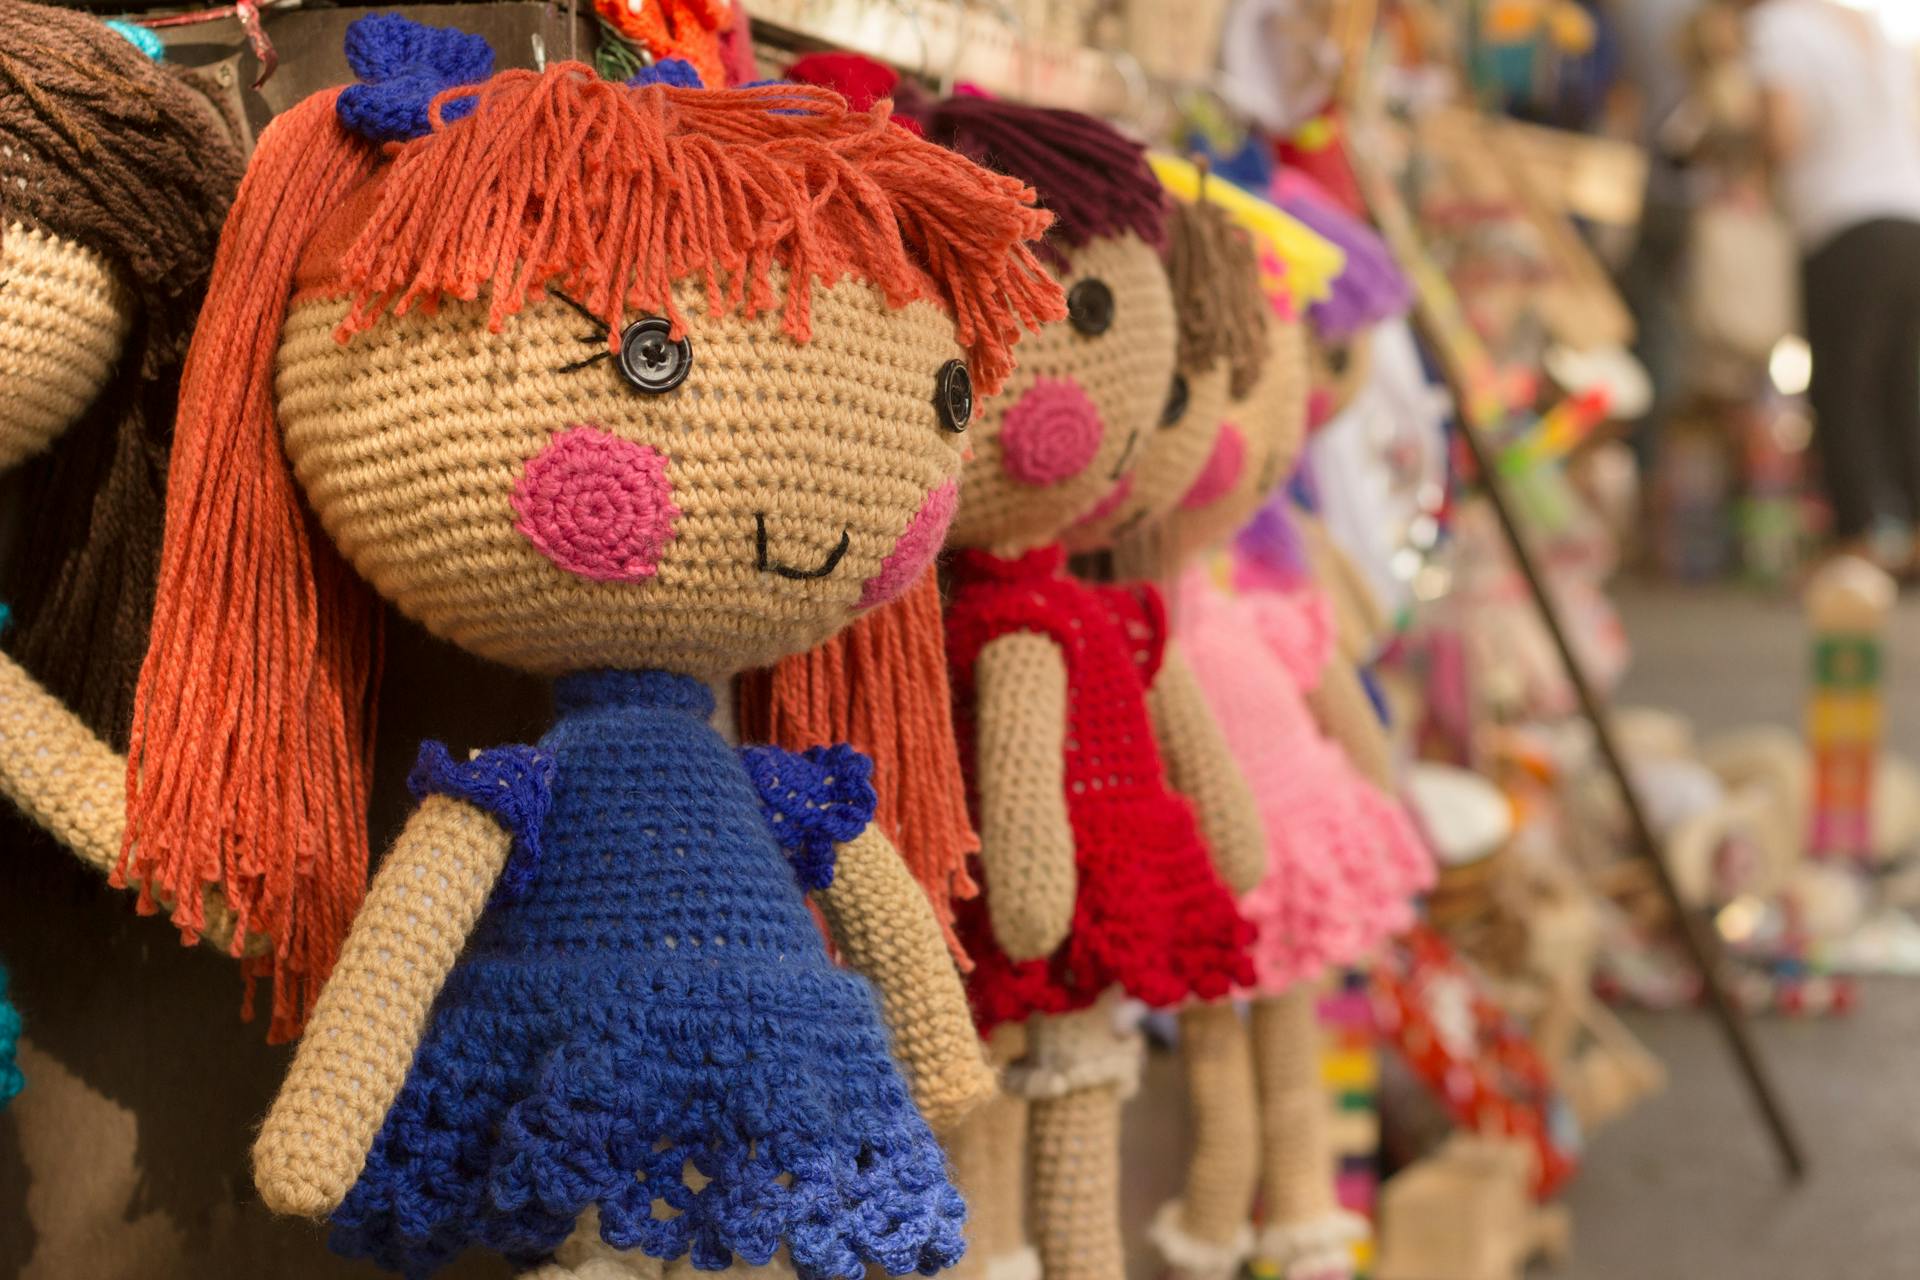 Crocheted dolls hanging in a shop | Source: Pexels